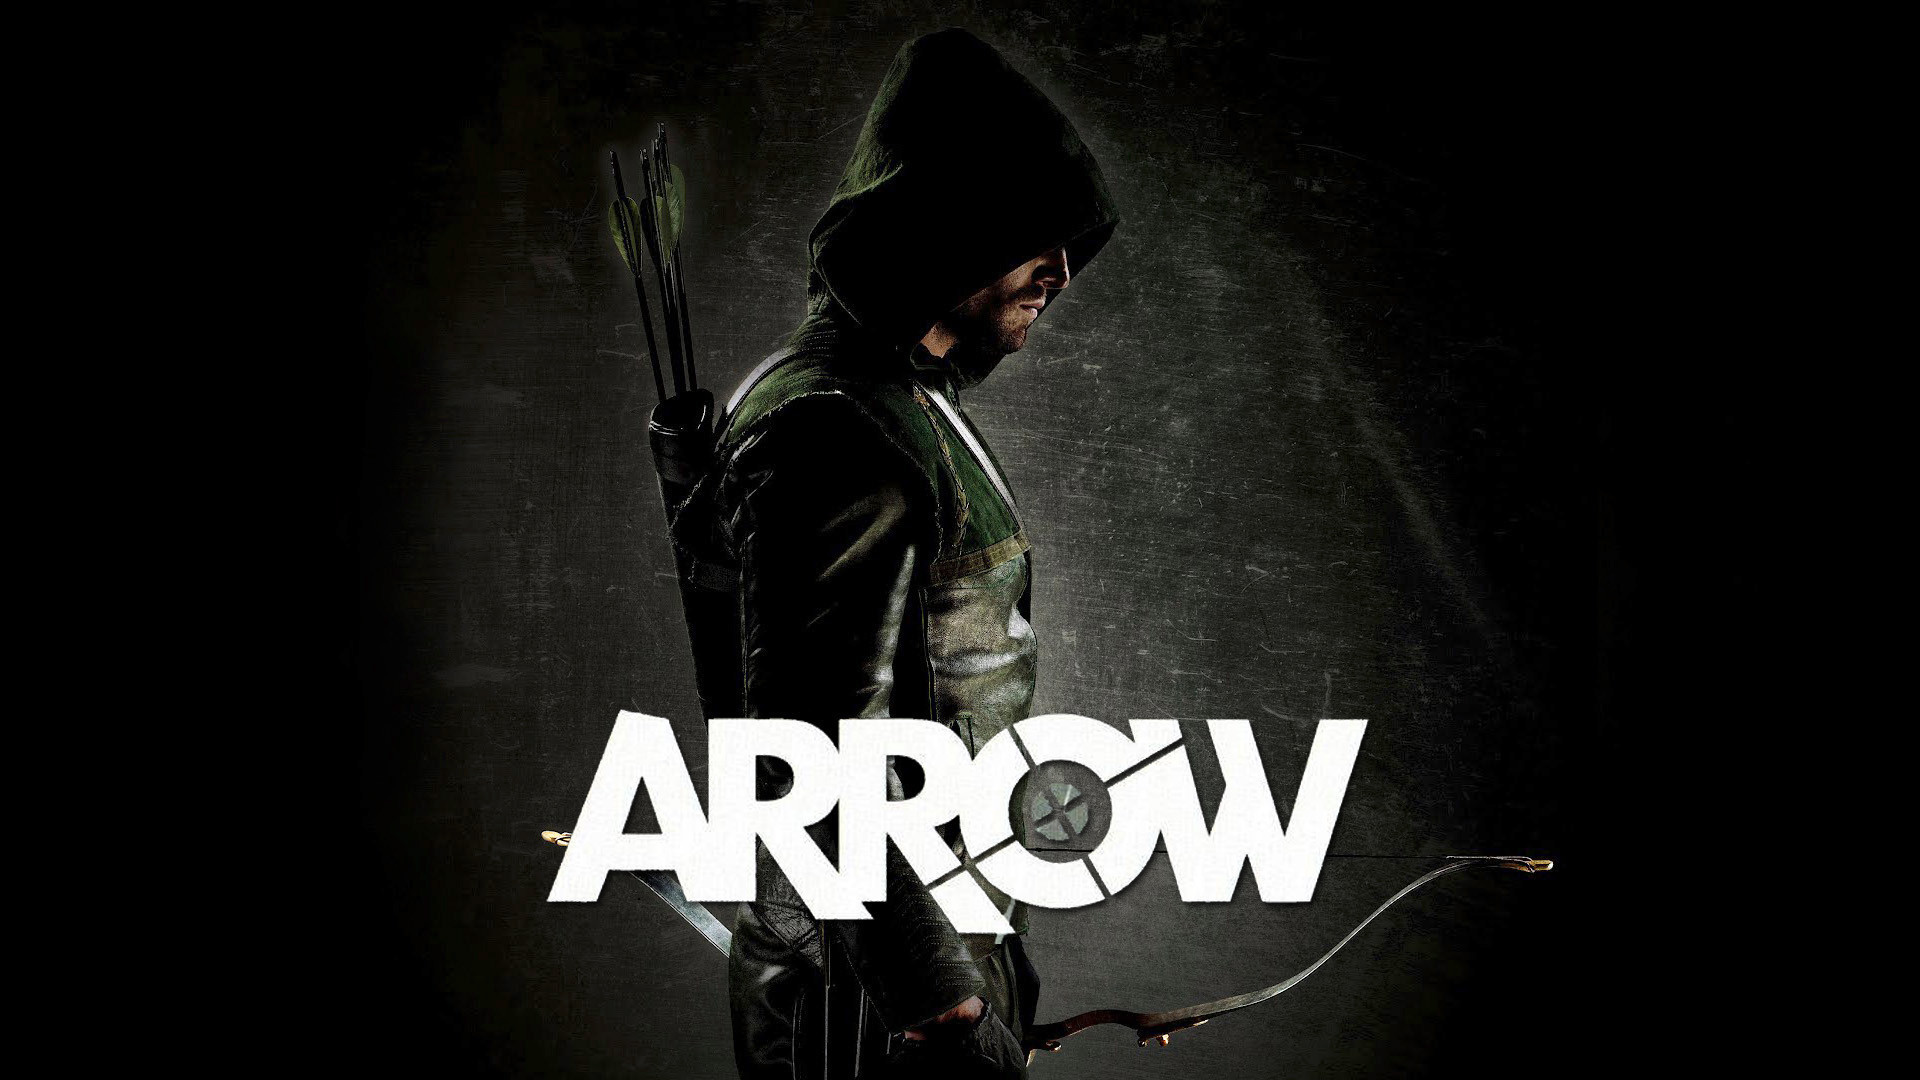 1920x1080 Arrow Wallpapers, Pictures, Images